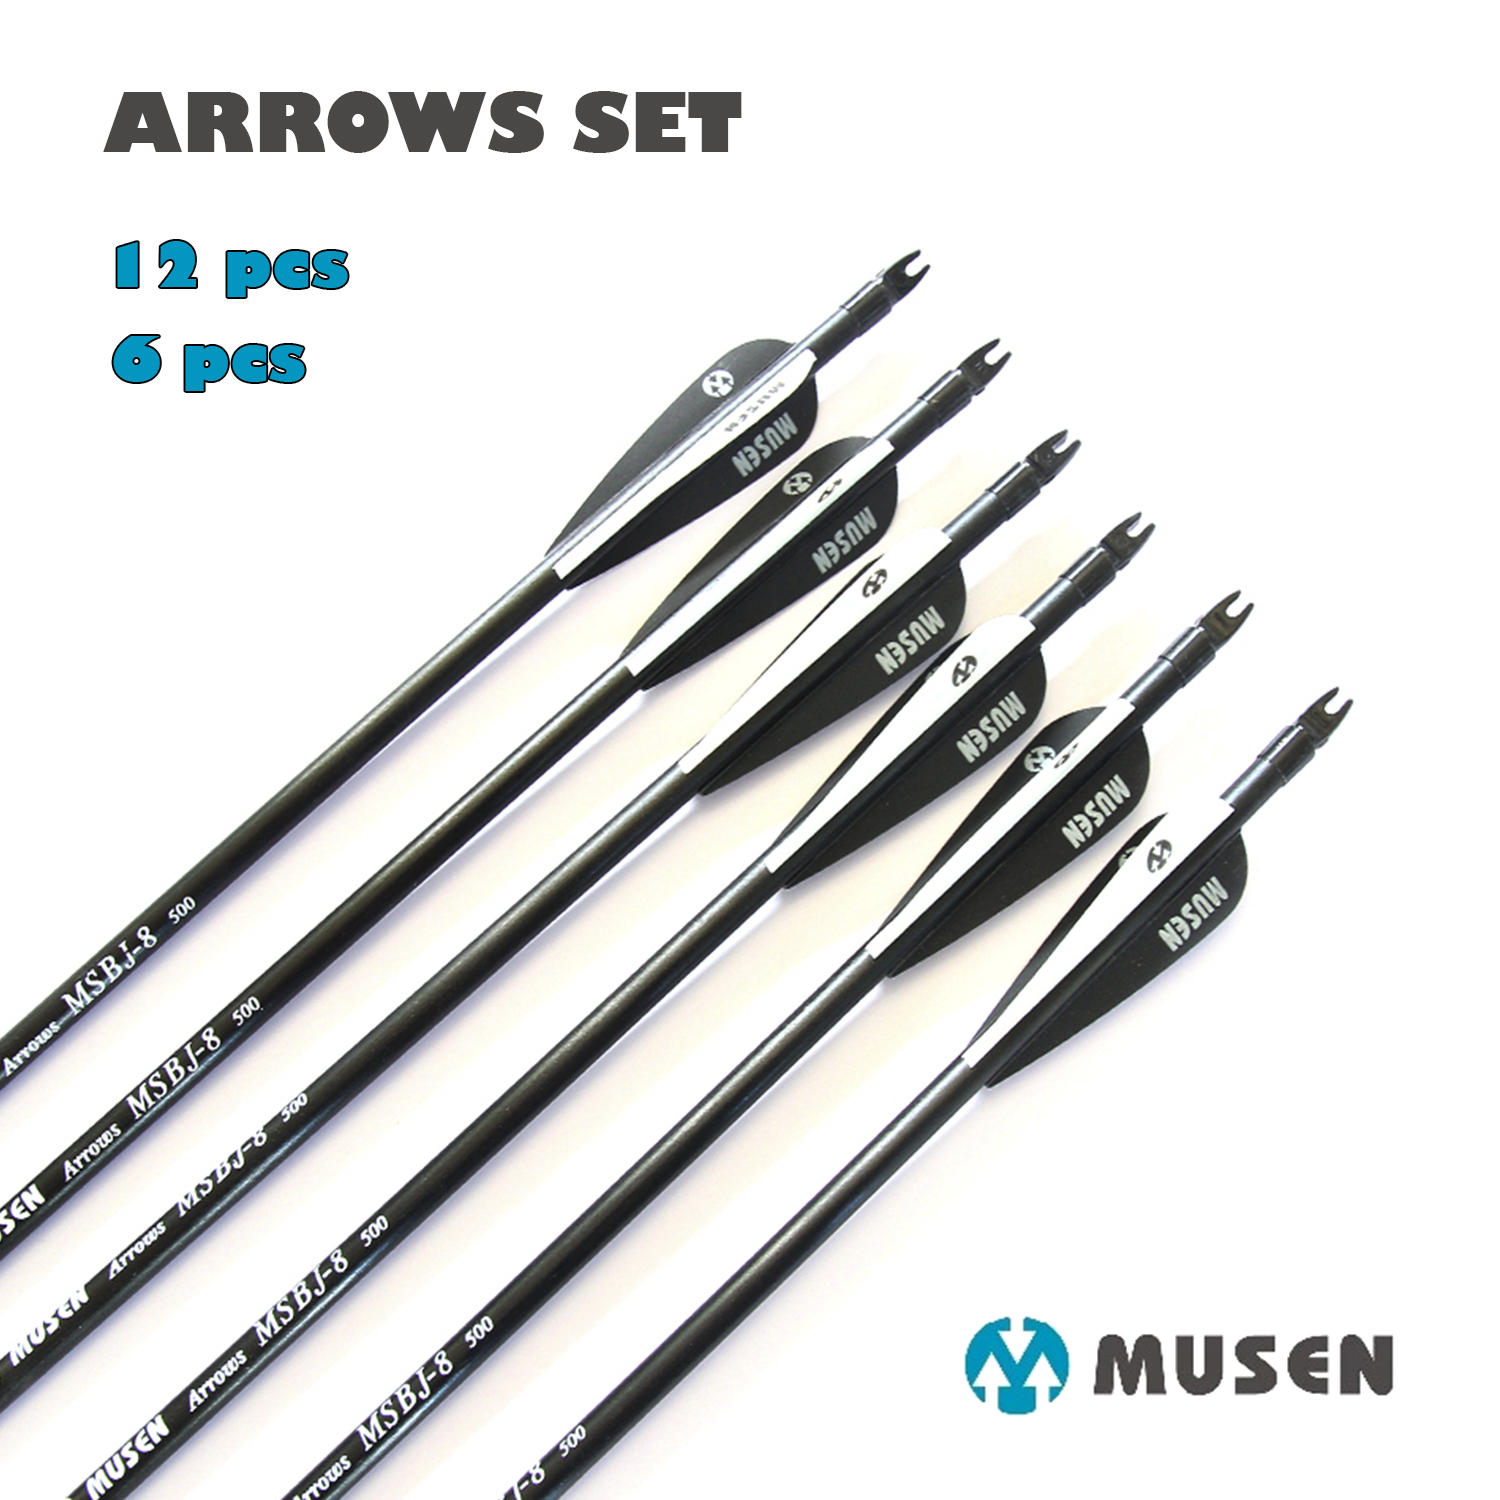 6/12pcs 80cm Spine 500 MSBJ-8 Fiberglass Arrows with Changeable Arrow Head for Compound Bow Target Practice Shooting